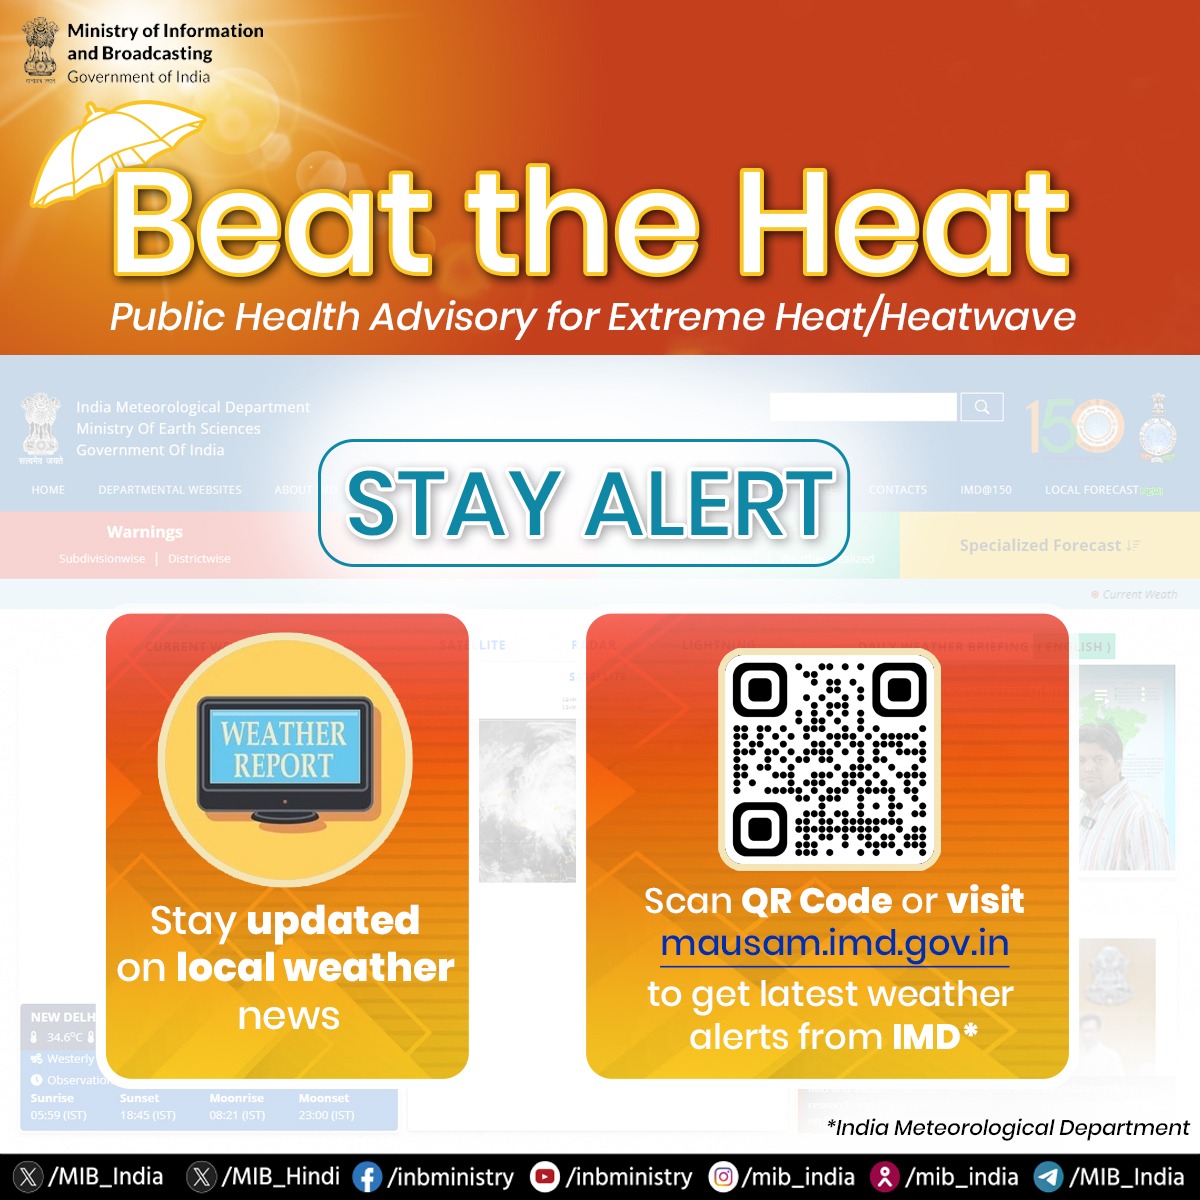 #HeatWave: Beat the Heat! 📝Public Health Advisory for Extreme Heat/Heatwave☀️ ➡️Stay Alert: 💠Stay updated on local weather news📻📺 💠Scan QR Code or visit mausam.imd.gov.in to get latest weather alerts from IMD📲 Stay safe and be aware! #WeatherReady #BeatTheHeat…